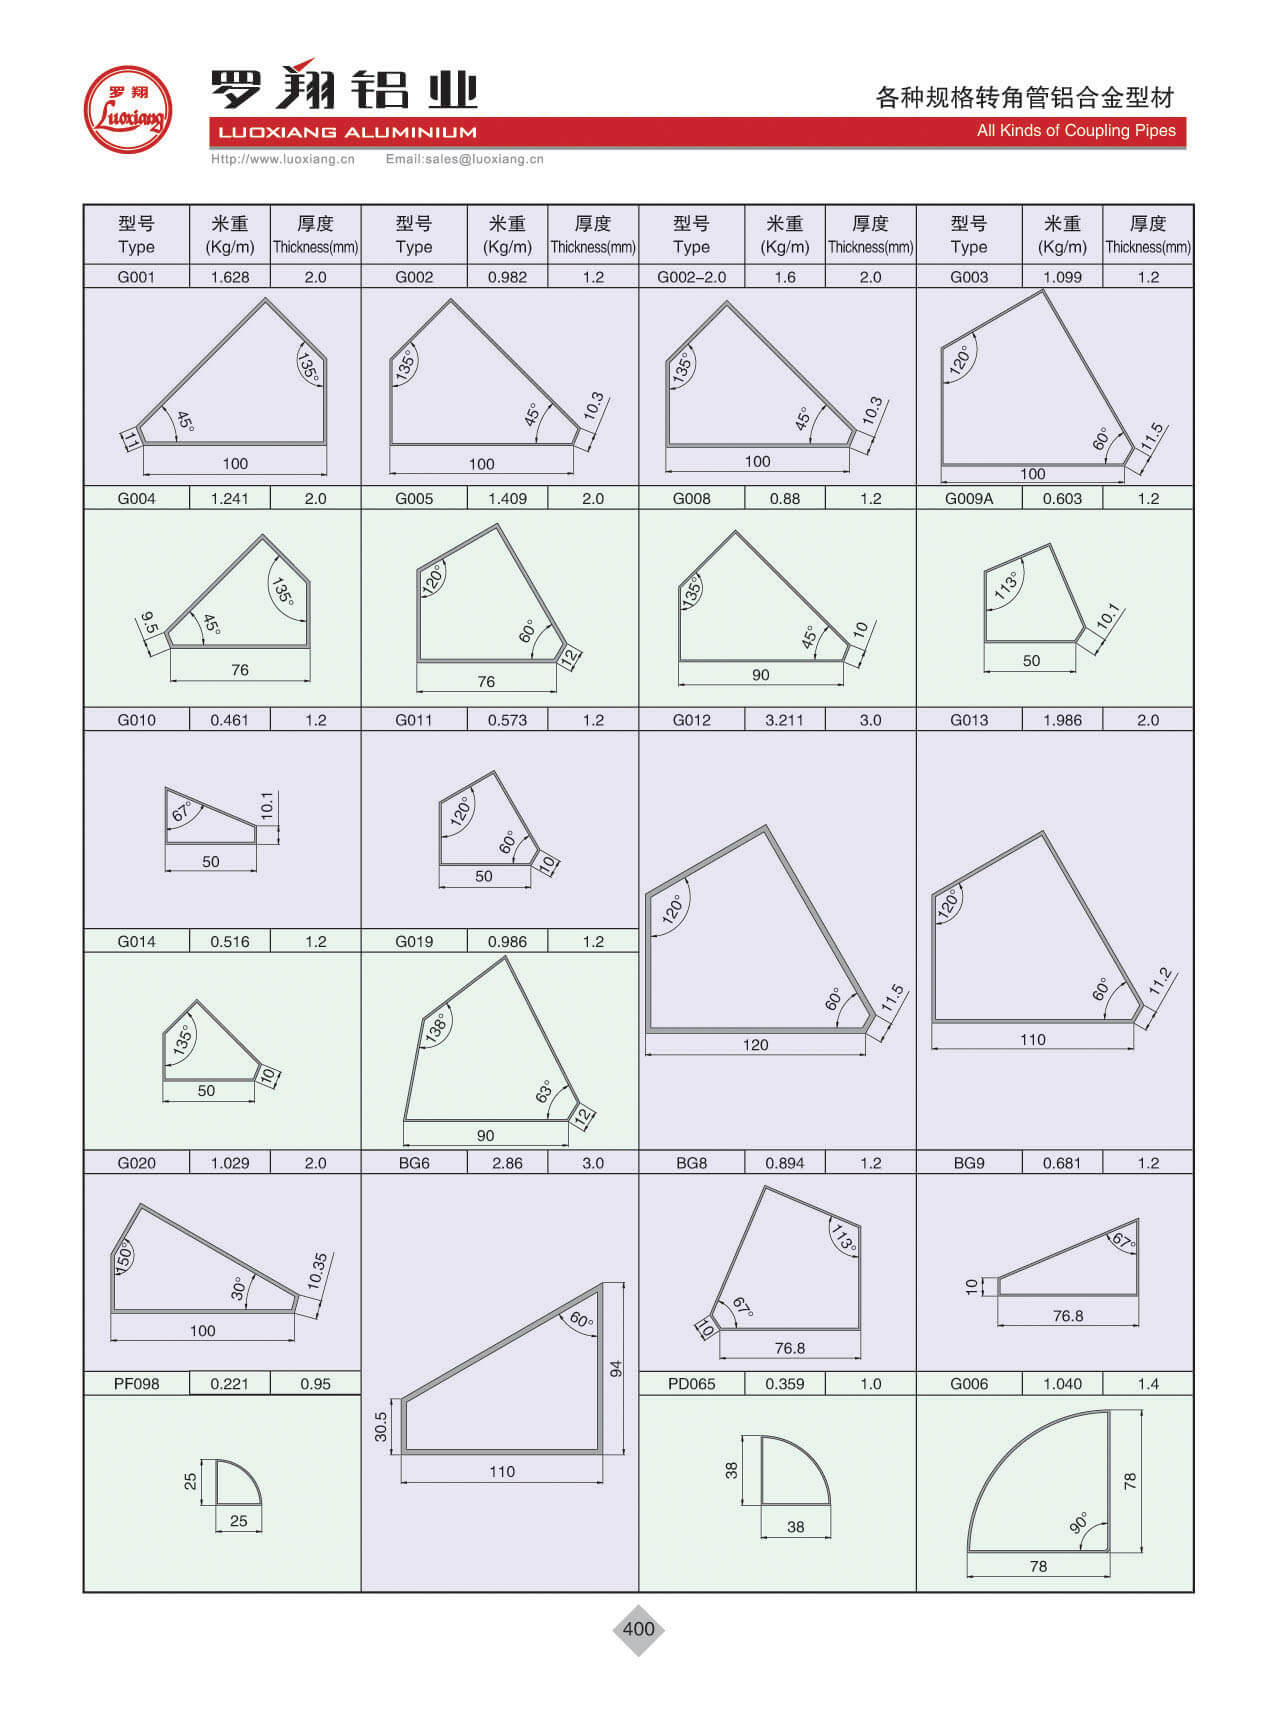 All Kinds Of Coupling Profiles